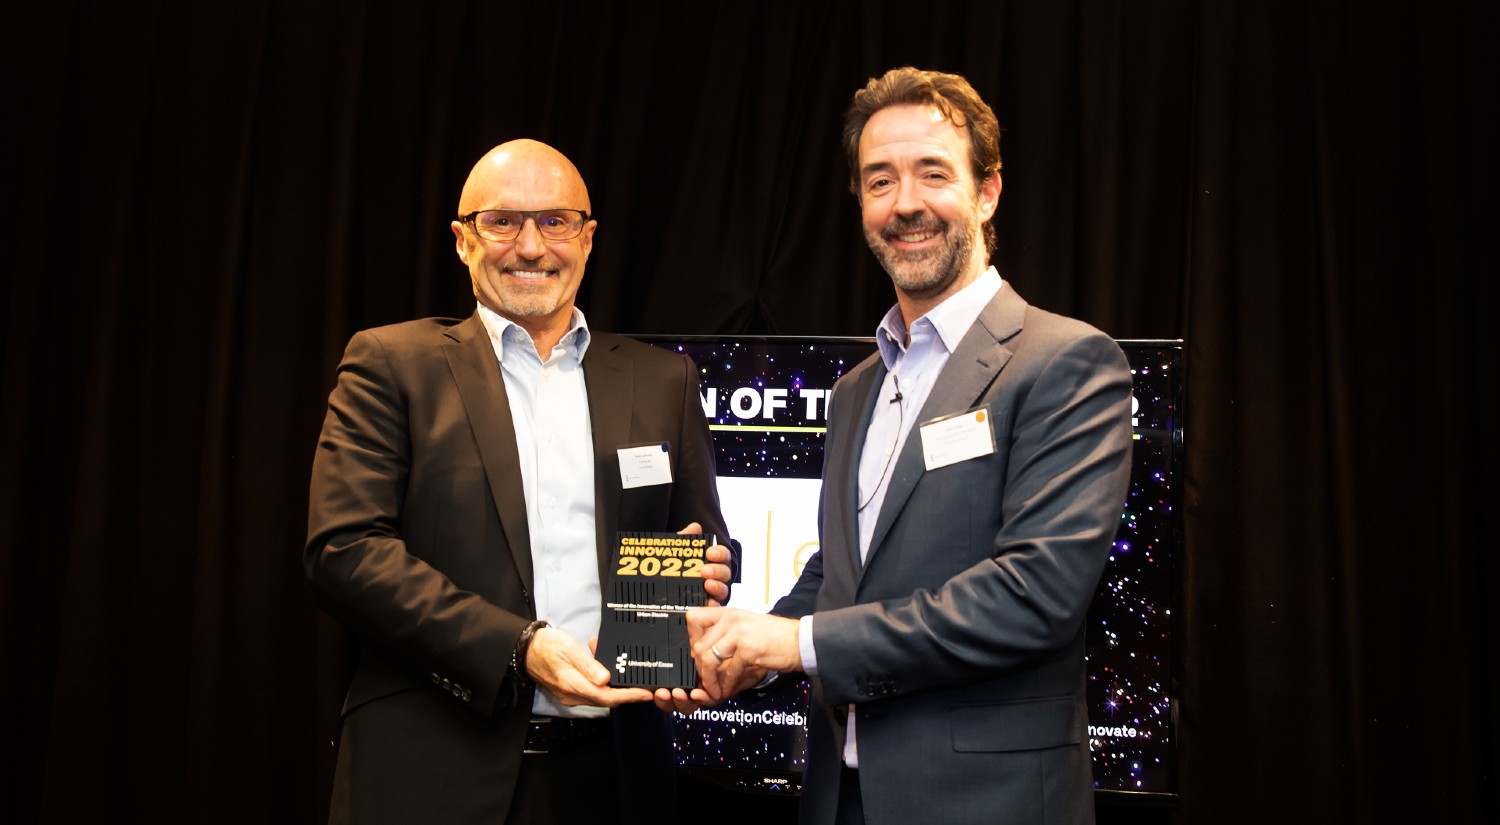 Keith Johnson receives the Innovation of the Year Award